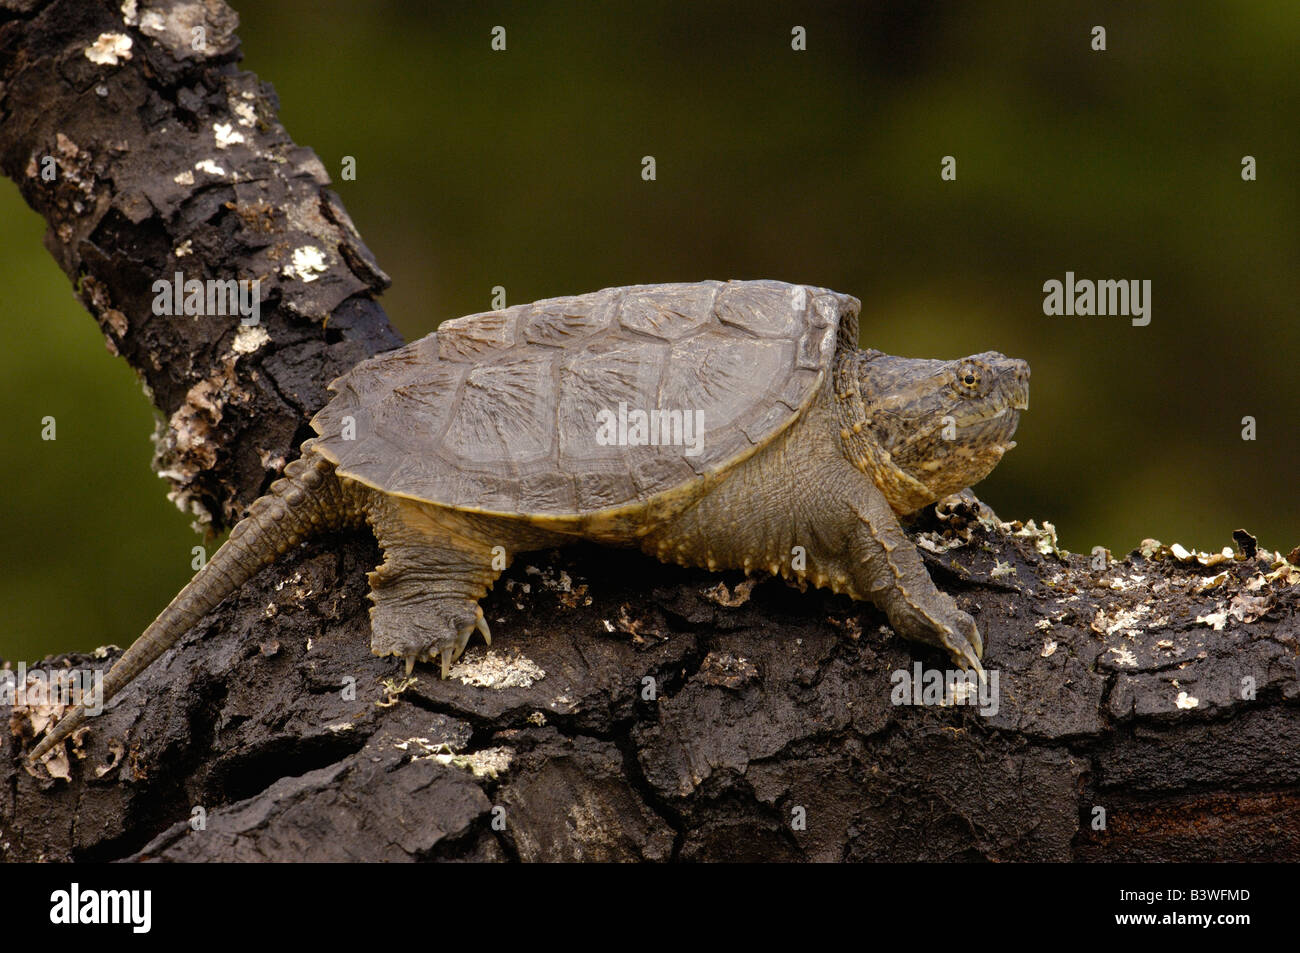 Alligator snapping turtle or South American Snapping turtle (Chelydra acutirostris serpentina) Northwest Ecuador. Stock Photo